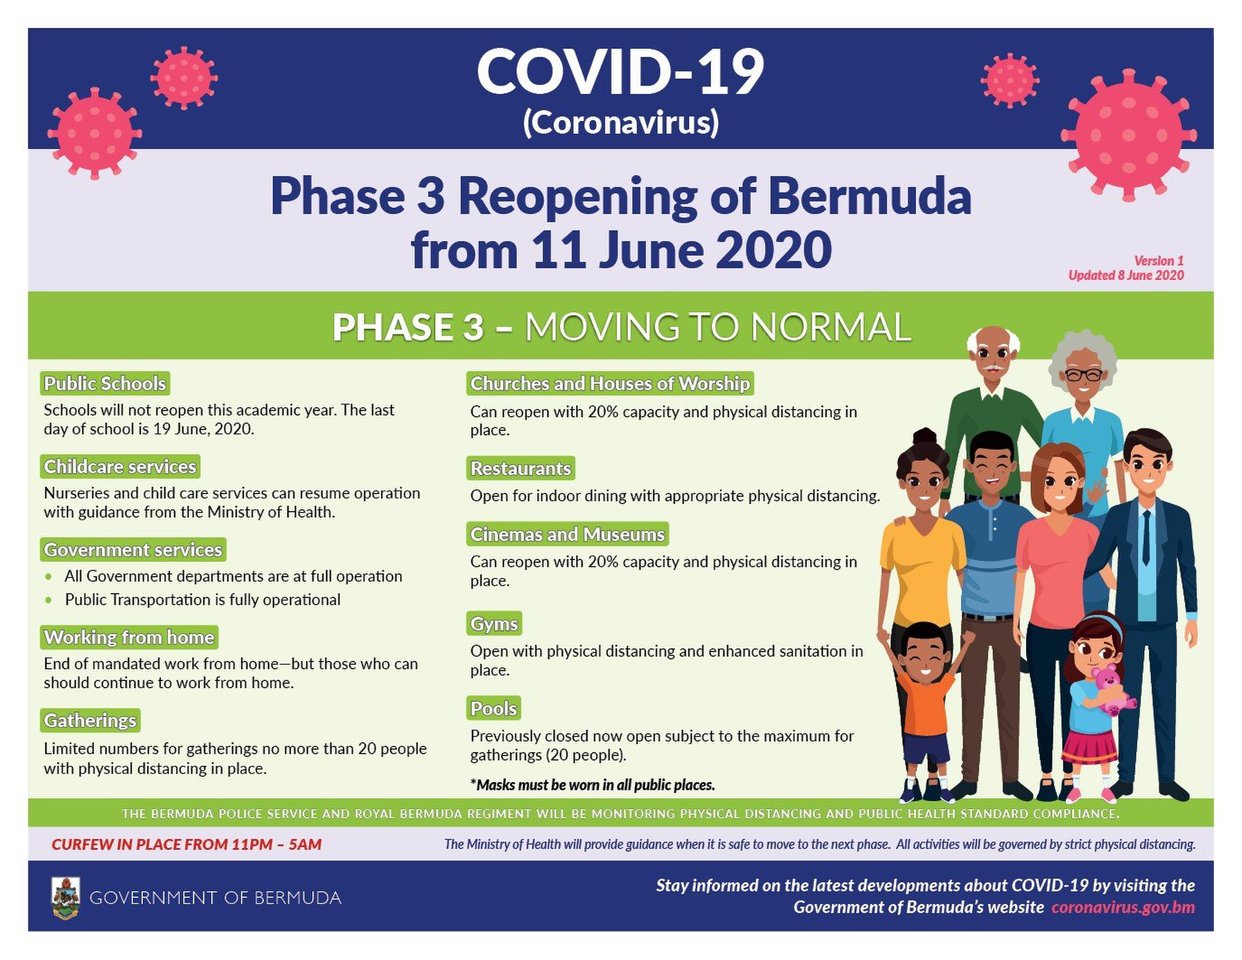 Bermuda will move to reopen phase 3 on Thursday 11 June